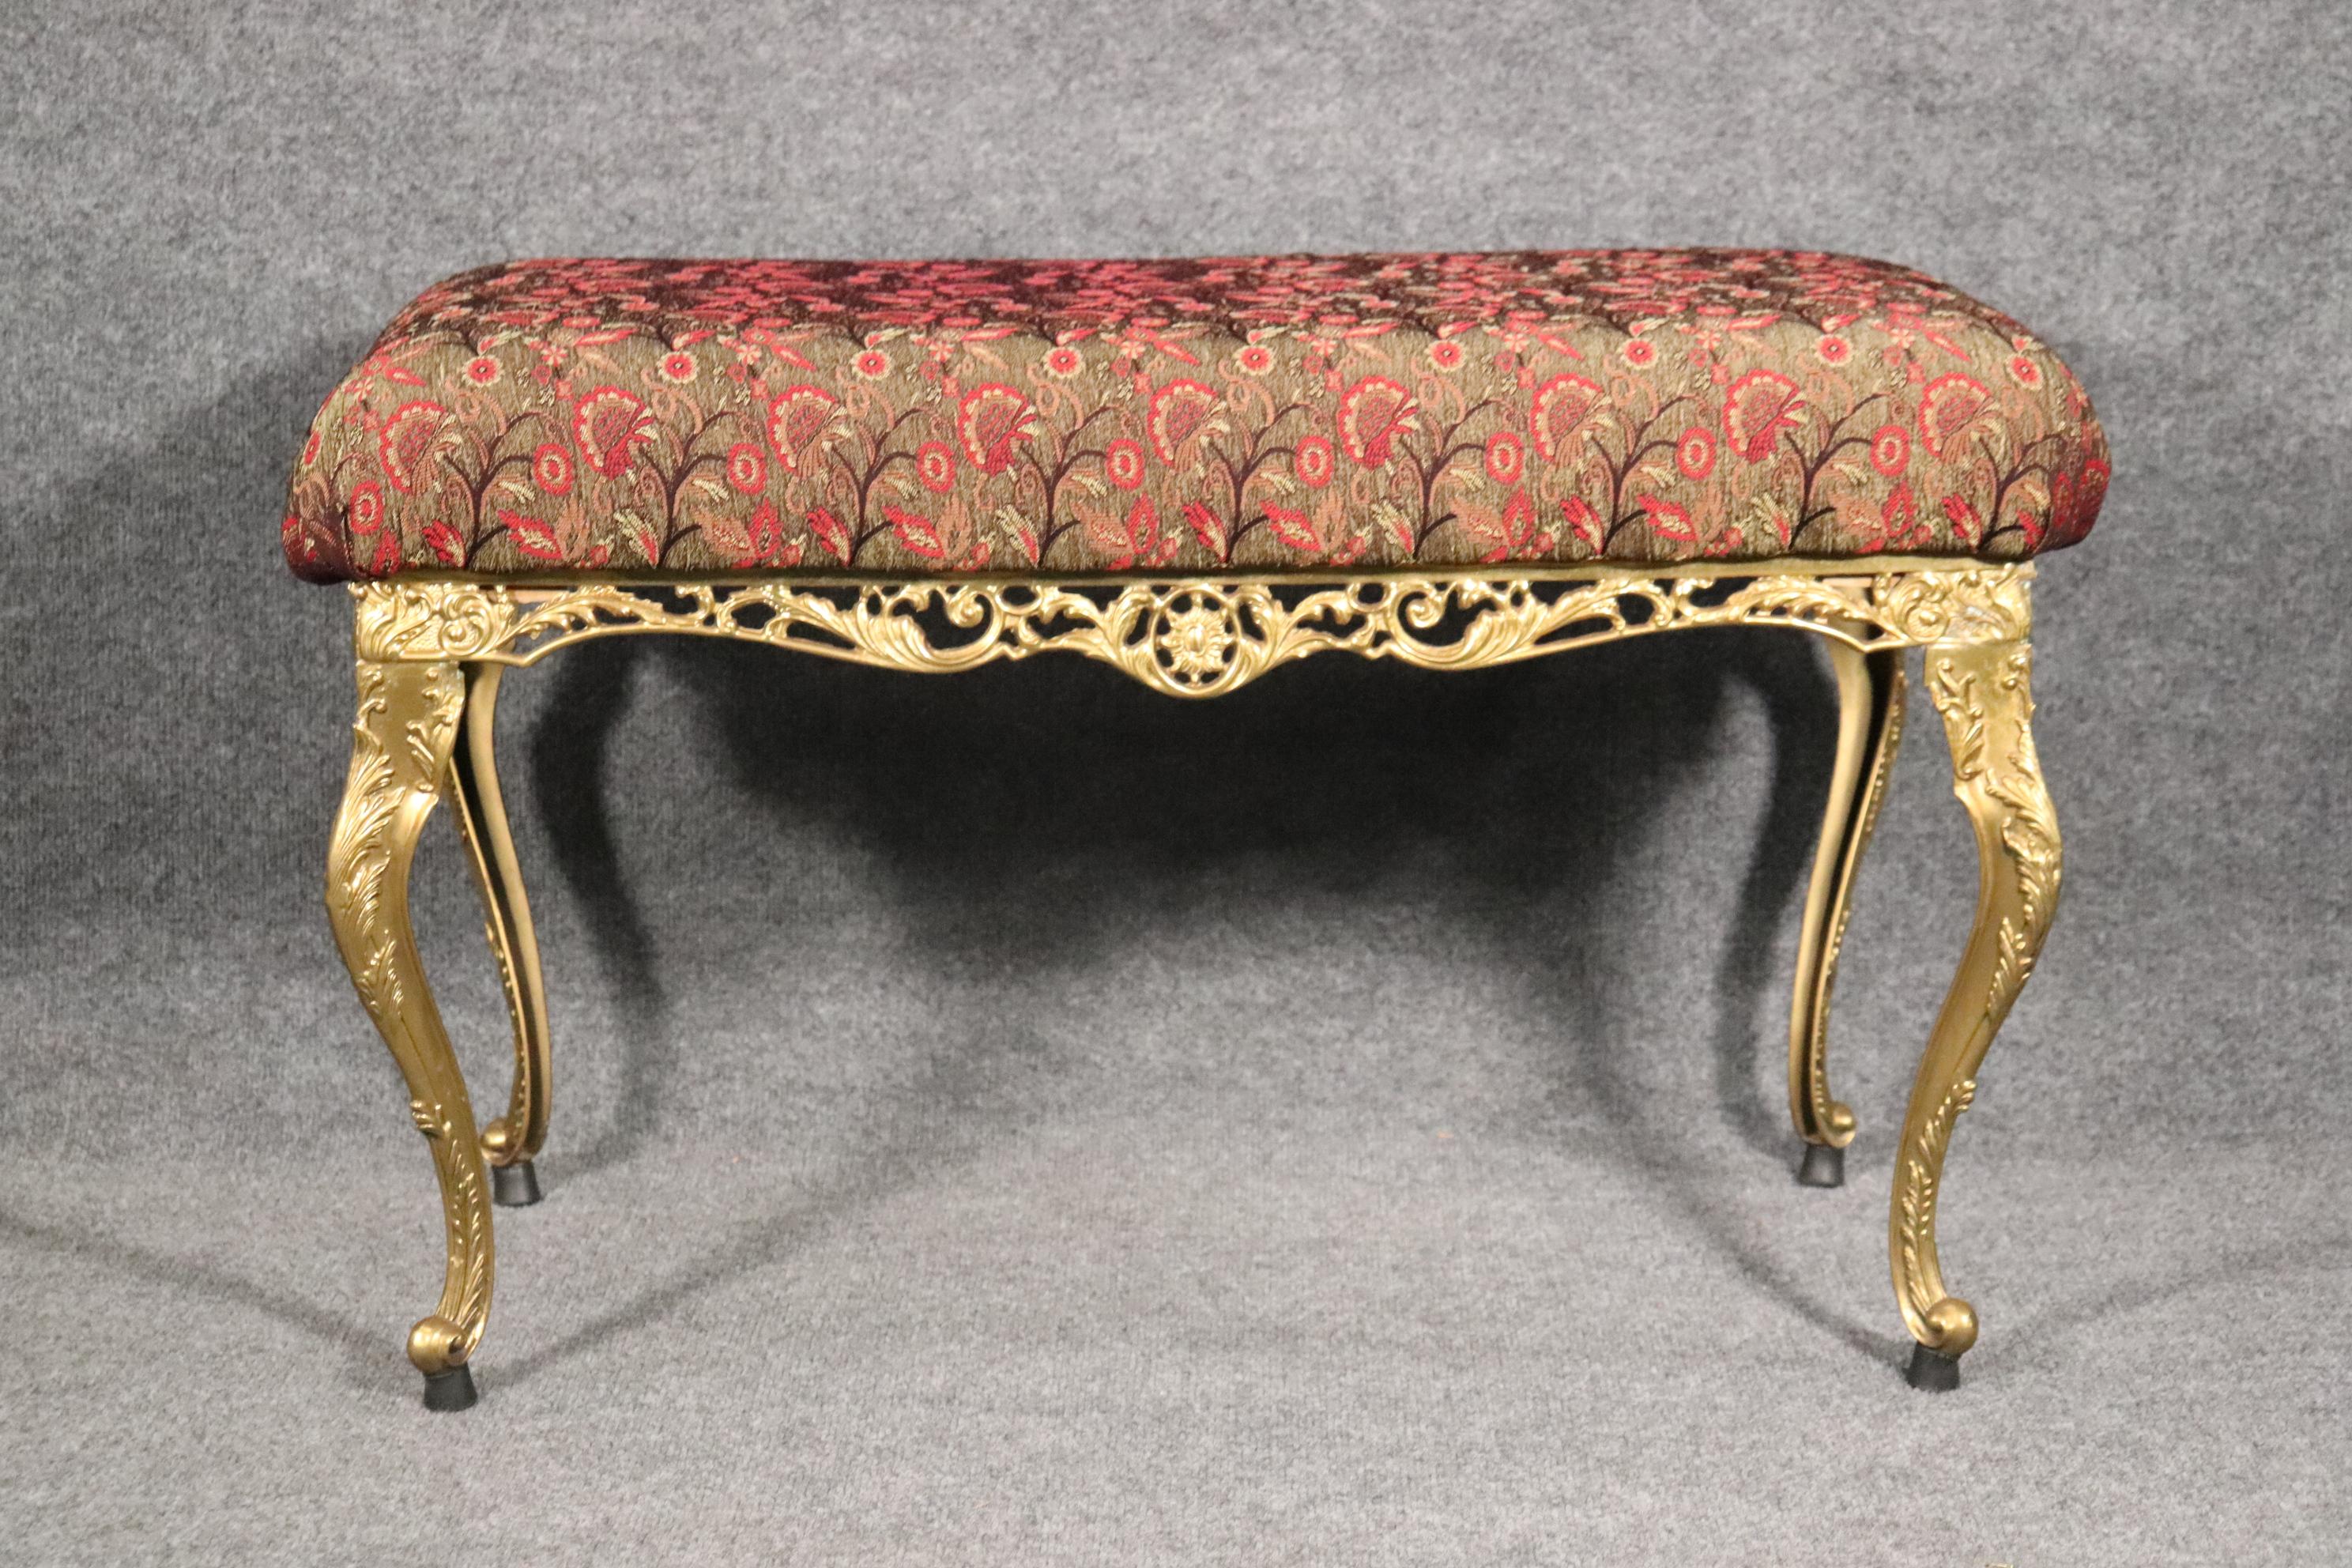 Dimensions: H: 20 1/2in in W: 34in D: 19in 
This Louis XV style bench is a high quality piece made from brass accompanied by a removable upholstered cushion. This bench/ottoman will add a nice sense of luxury and character into your place of